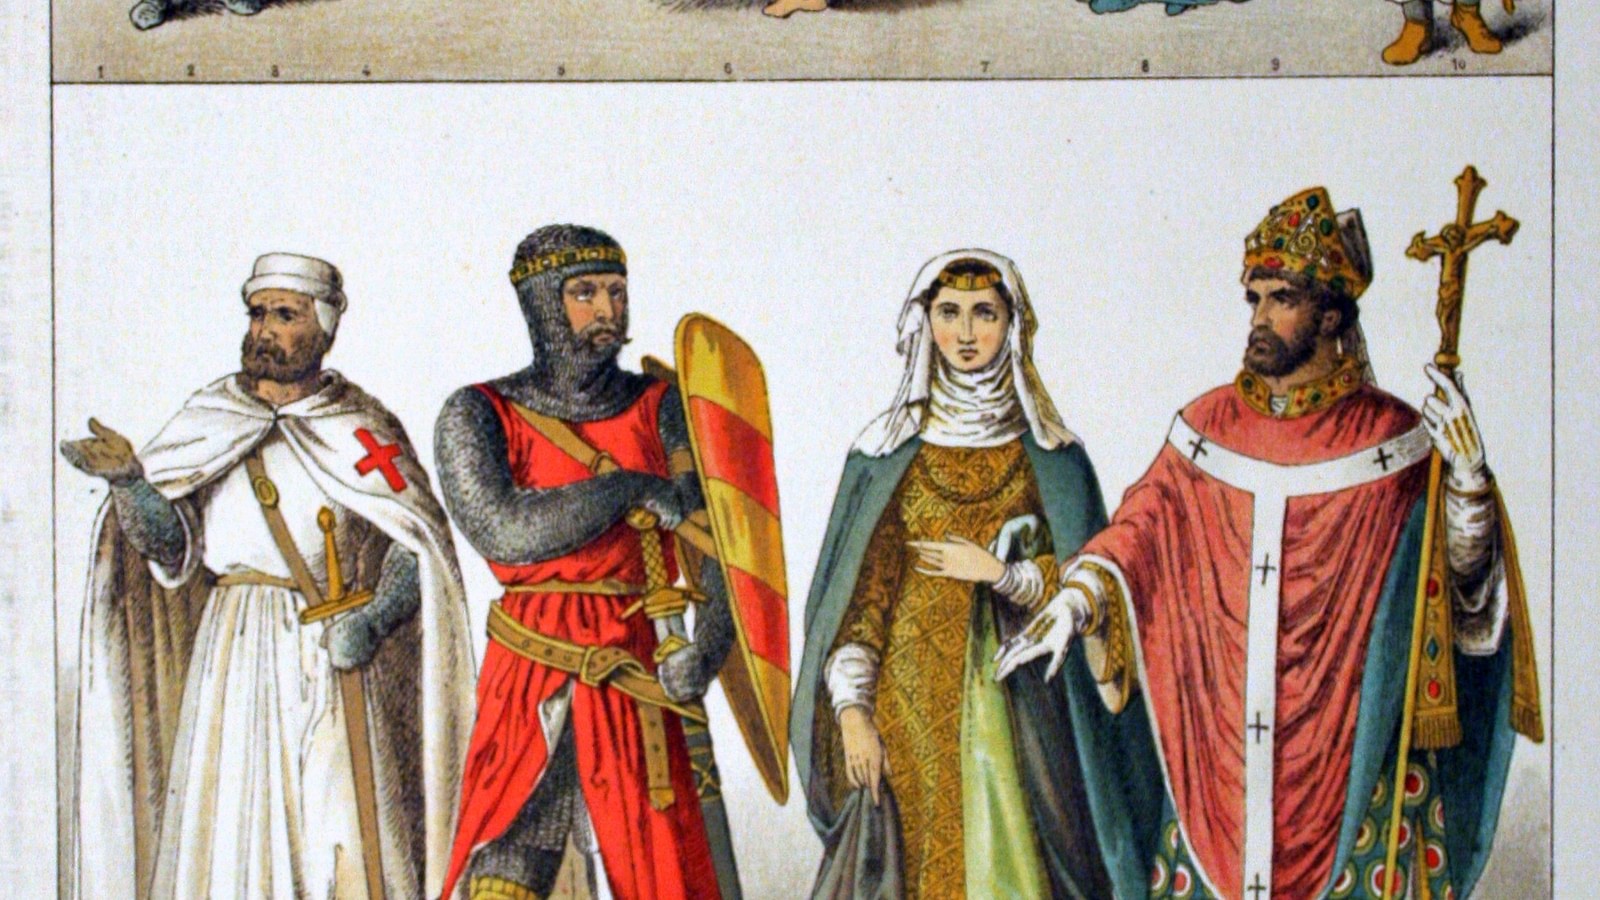 Medieval Clothing: Tunic. History of the tunic, uses and cloak styles.